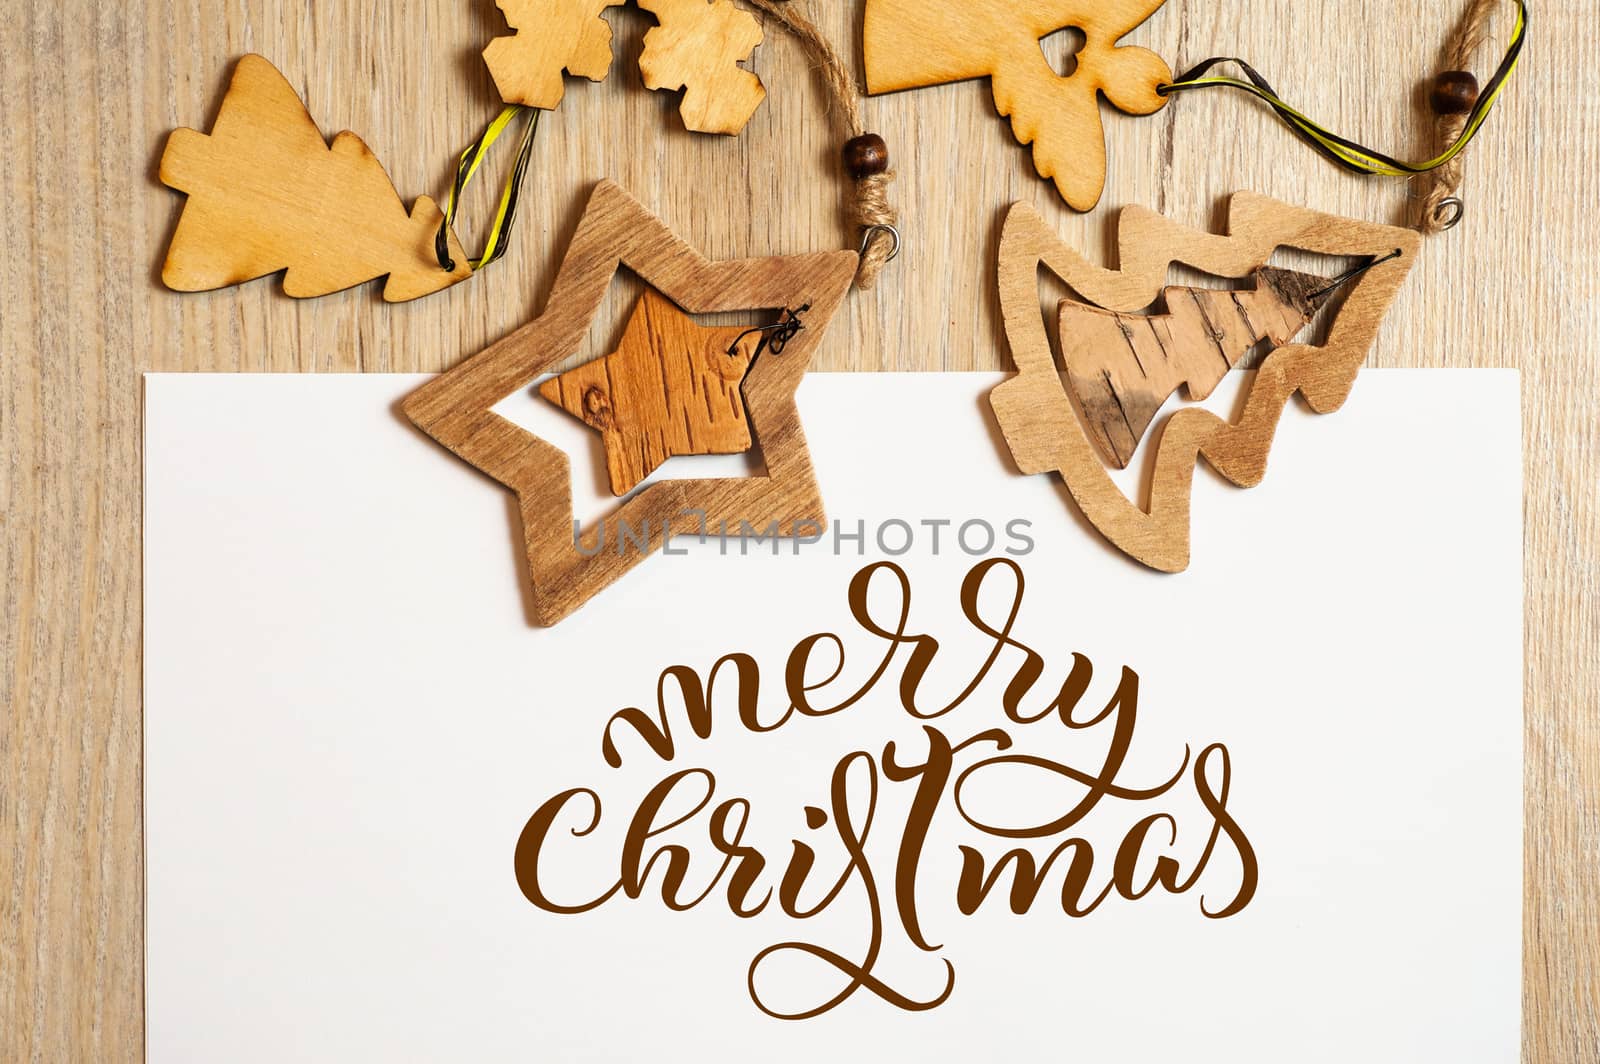 Wooden toys on white background with text Merry Christmas. Calligraphy lettering.